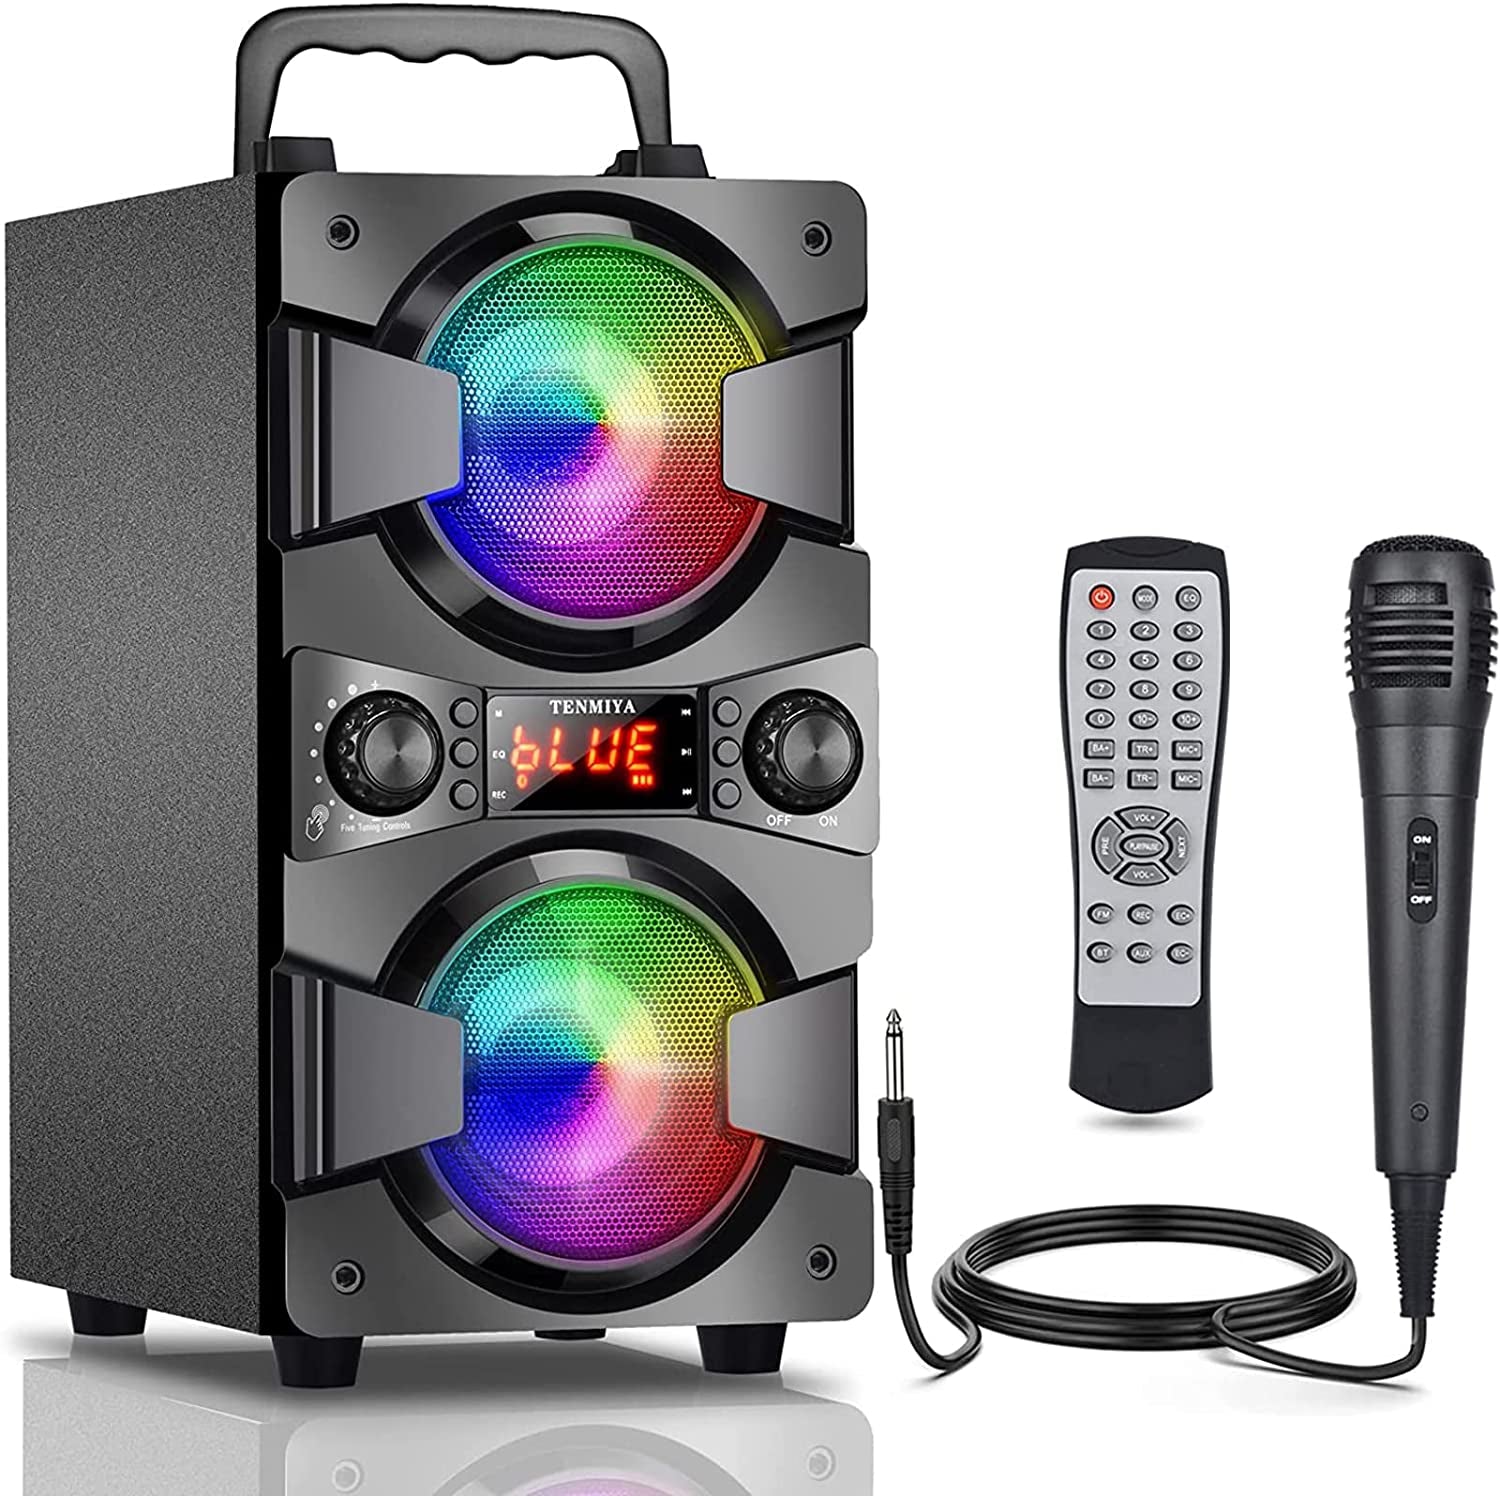 High-Quality 60W Portable Bluetooth Speaker with Dual Subwoofer for Enhanced Bass, FM Radio, Built-in Microphone, LED Lights, Remote Control, EQ, and Immersive Stereo Sound System - Perfect for Home, Outdoor Parties, and Camping (Includes 1 Microphone)